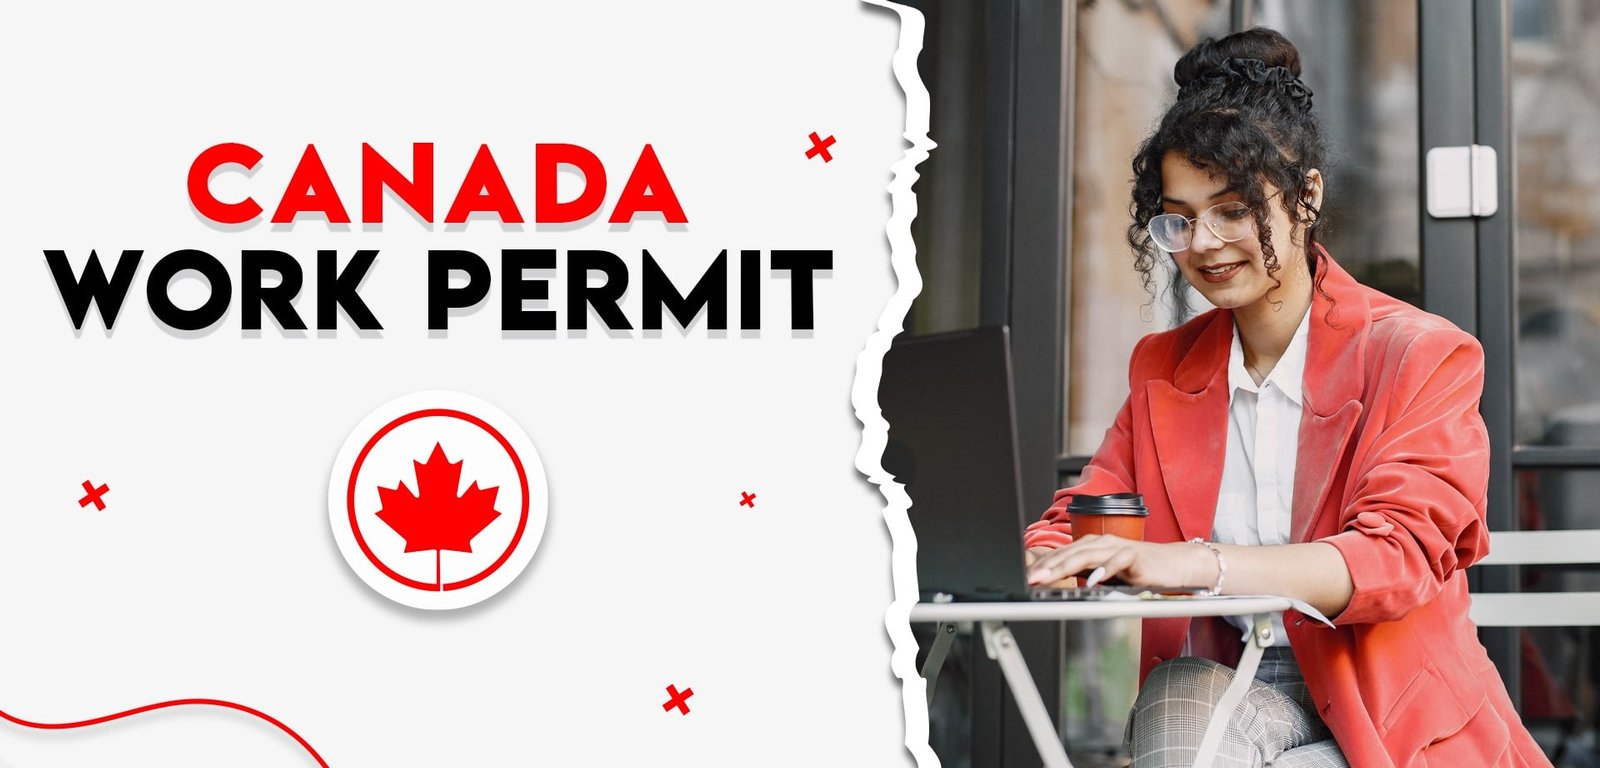 NEW LMIA APPROVED JOBS IN CANADA FOR FOREIGNERS 2023